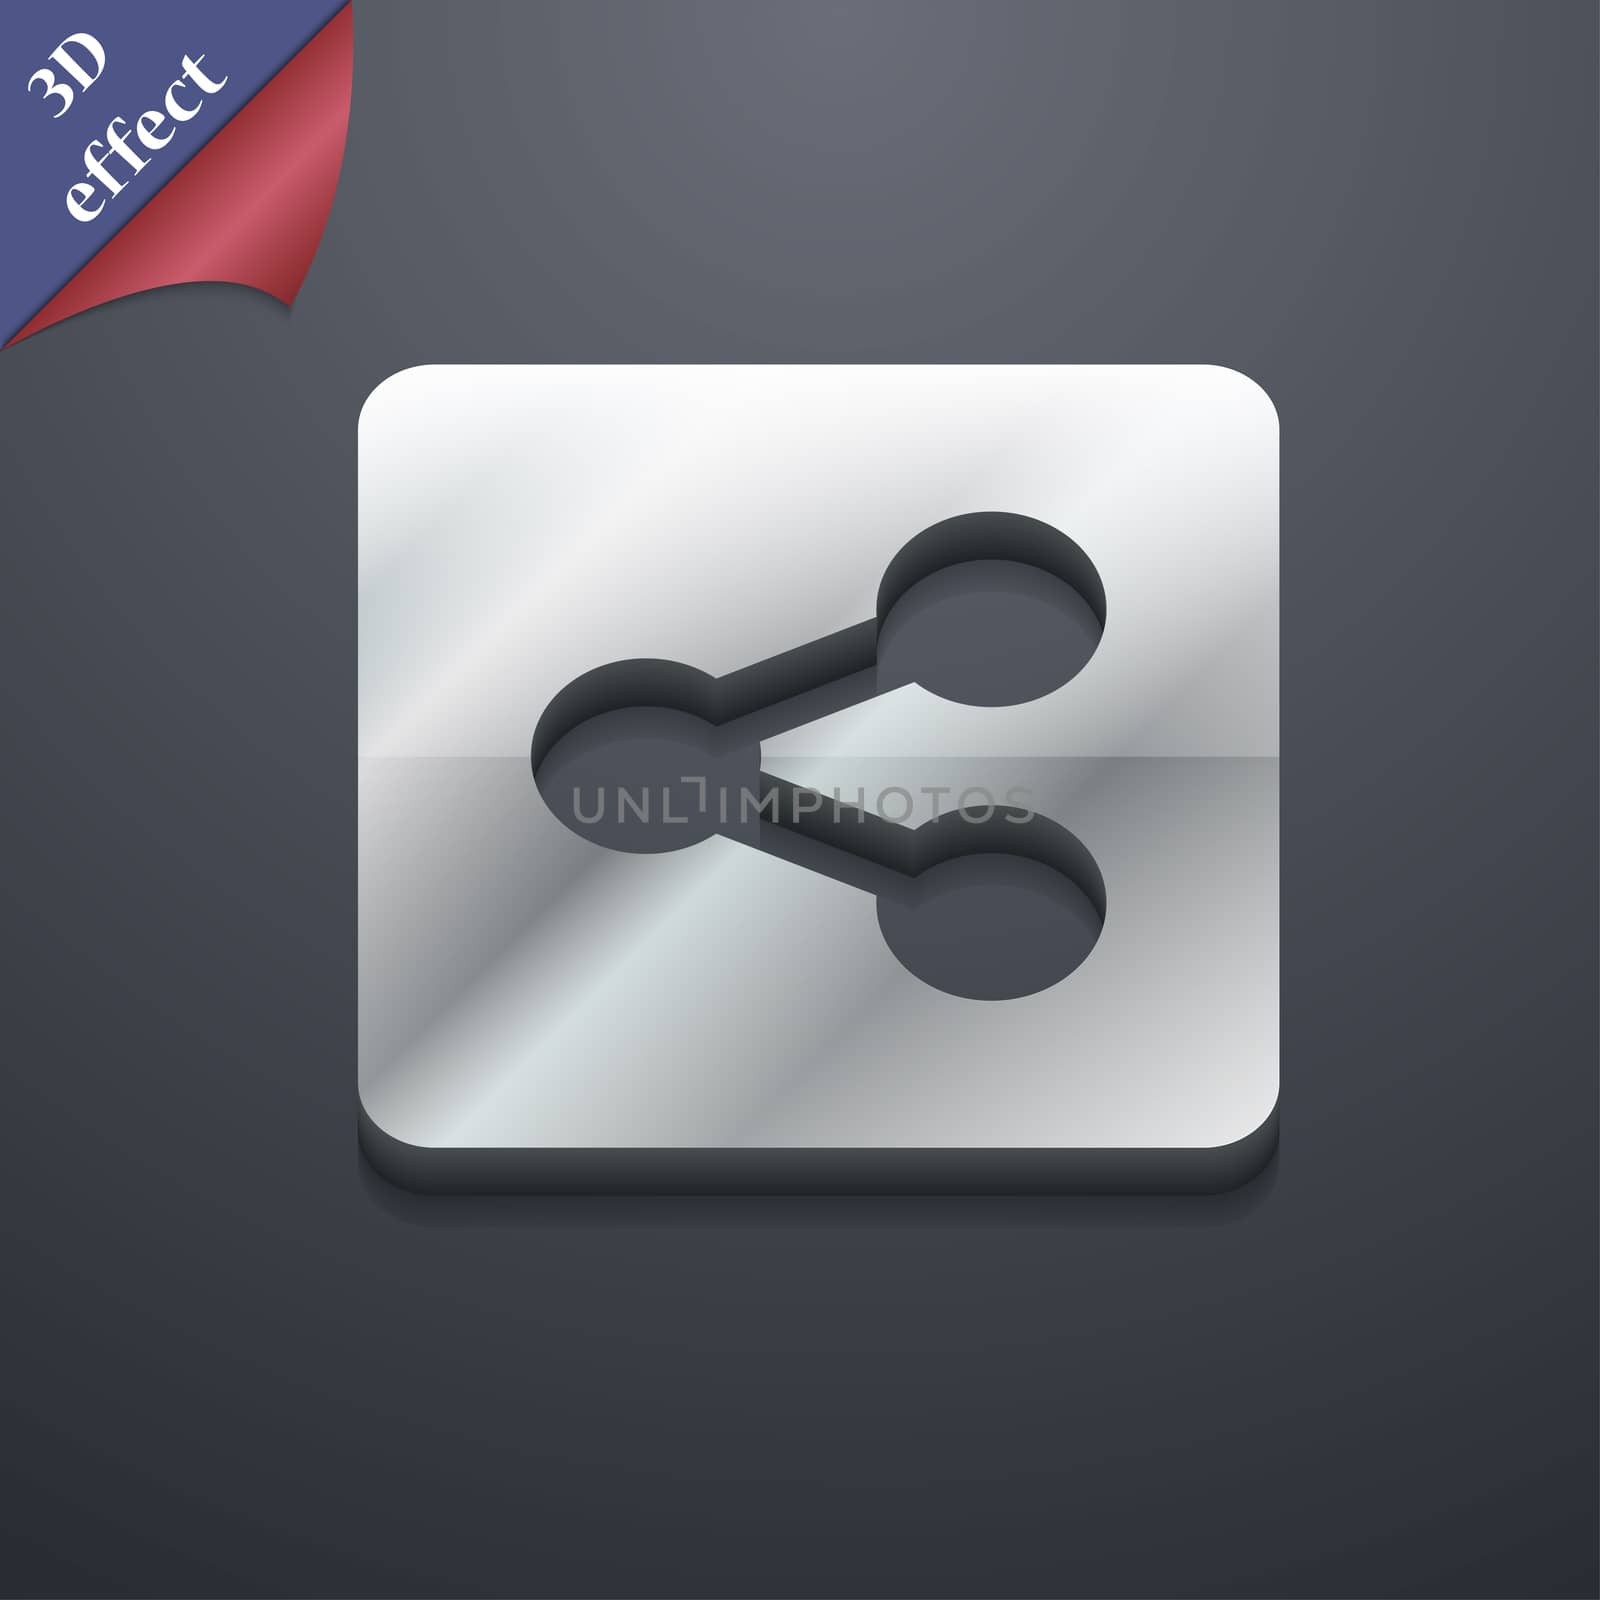 Share icon symbol. 3D style. Trendy, modern design with space for your text illustration. Rastrized copy